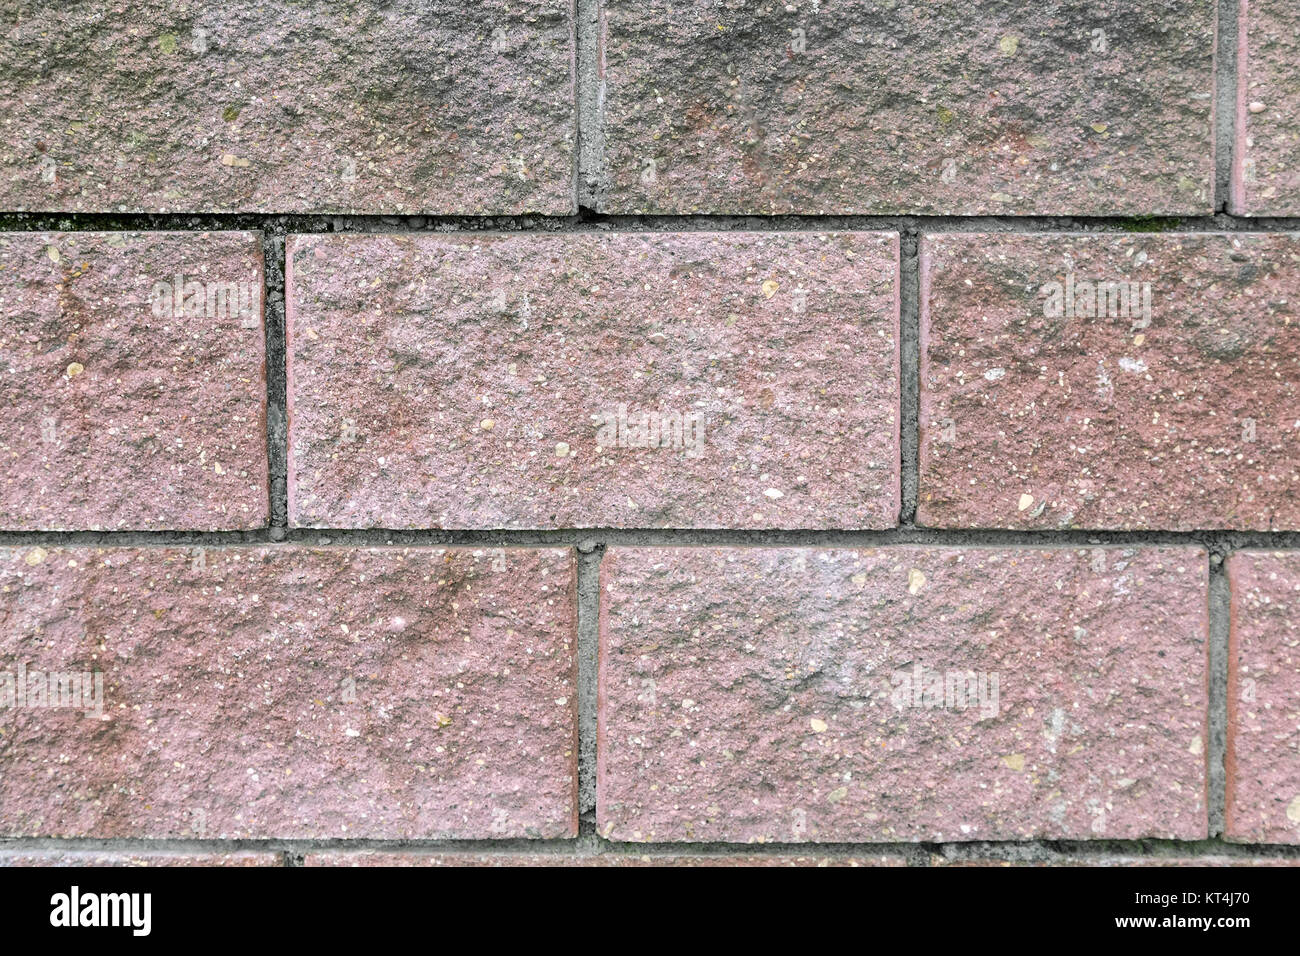 Background image: a fragment of brick wall. Stock Photo